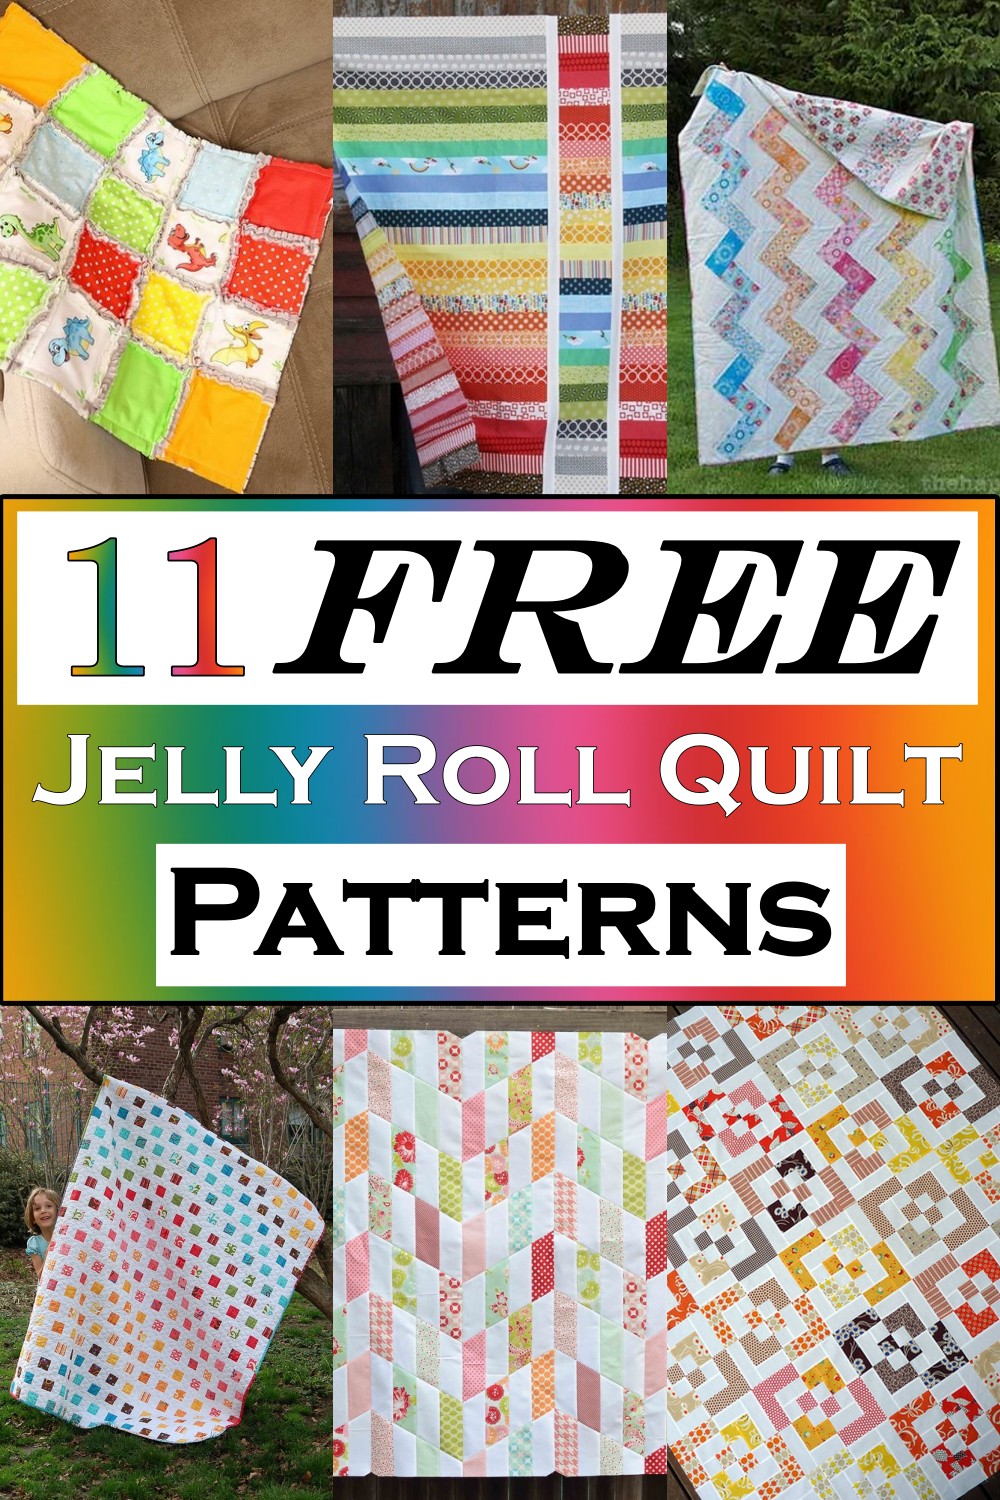 Free Jelly Roll Quilt Patterns 1